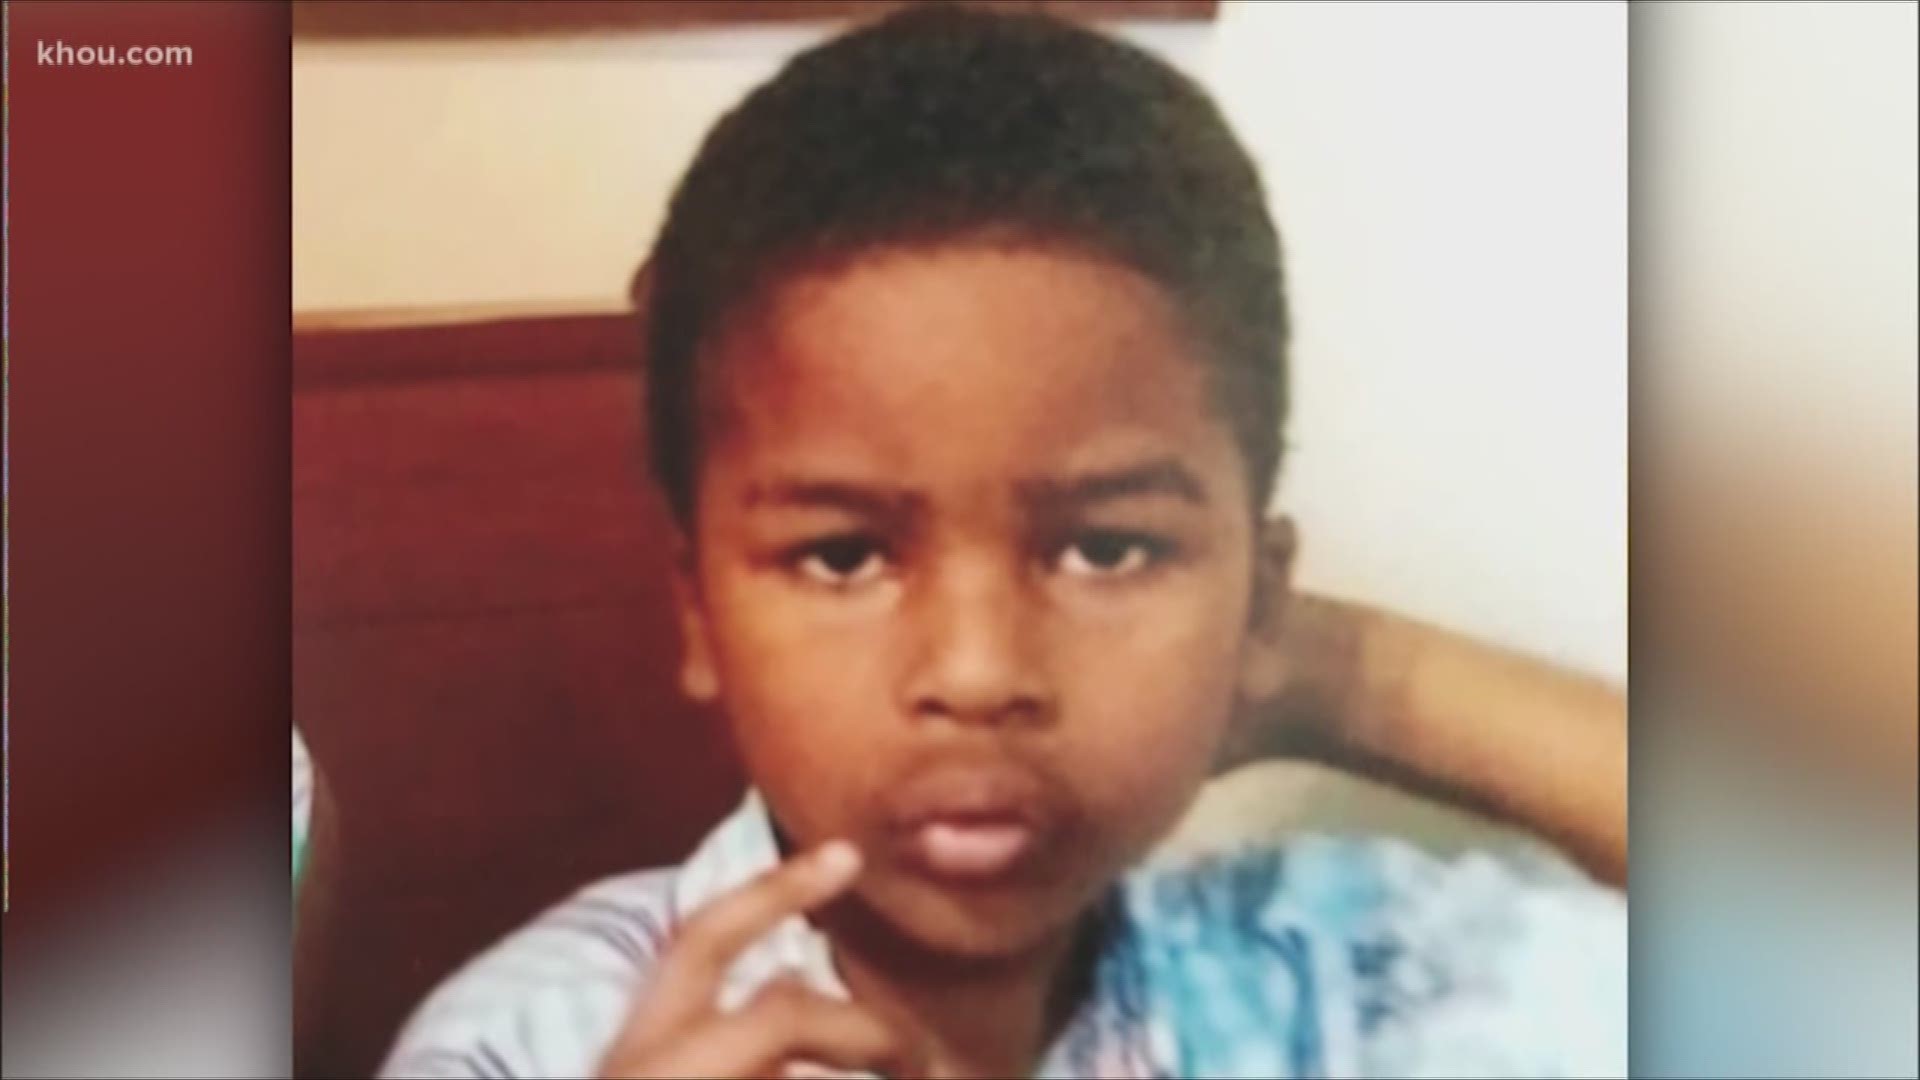 The child's body found in a retention pond on Monday has been identified as missing 7 year old Xavion Young.